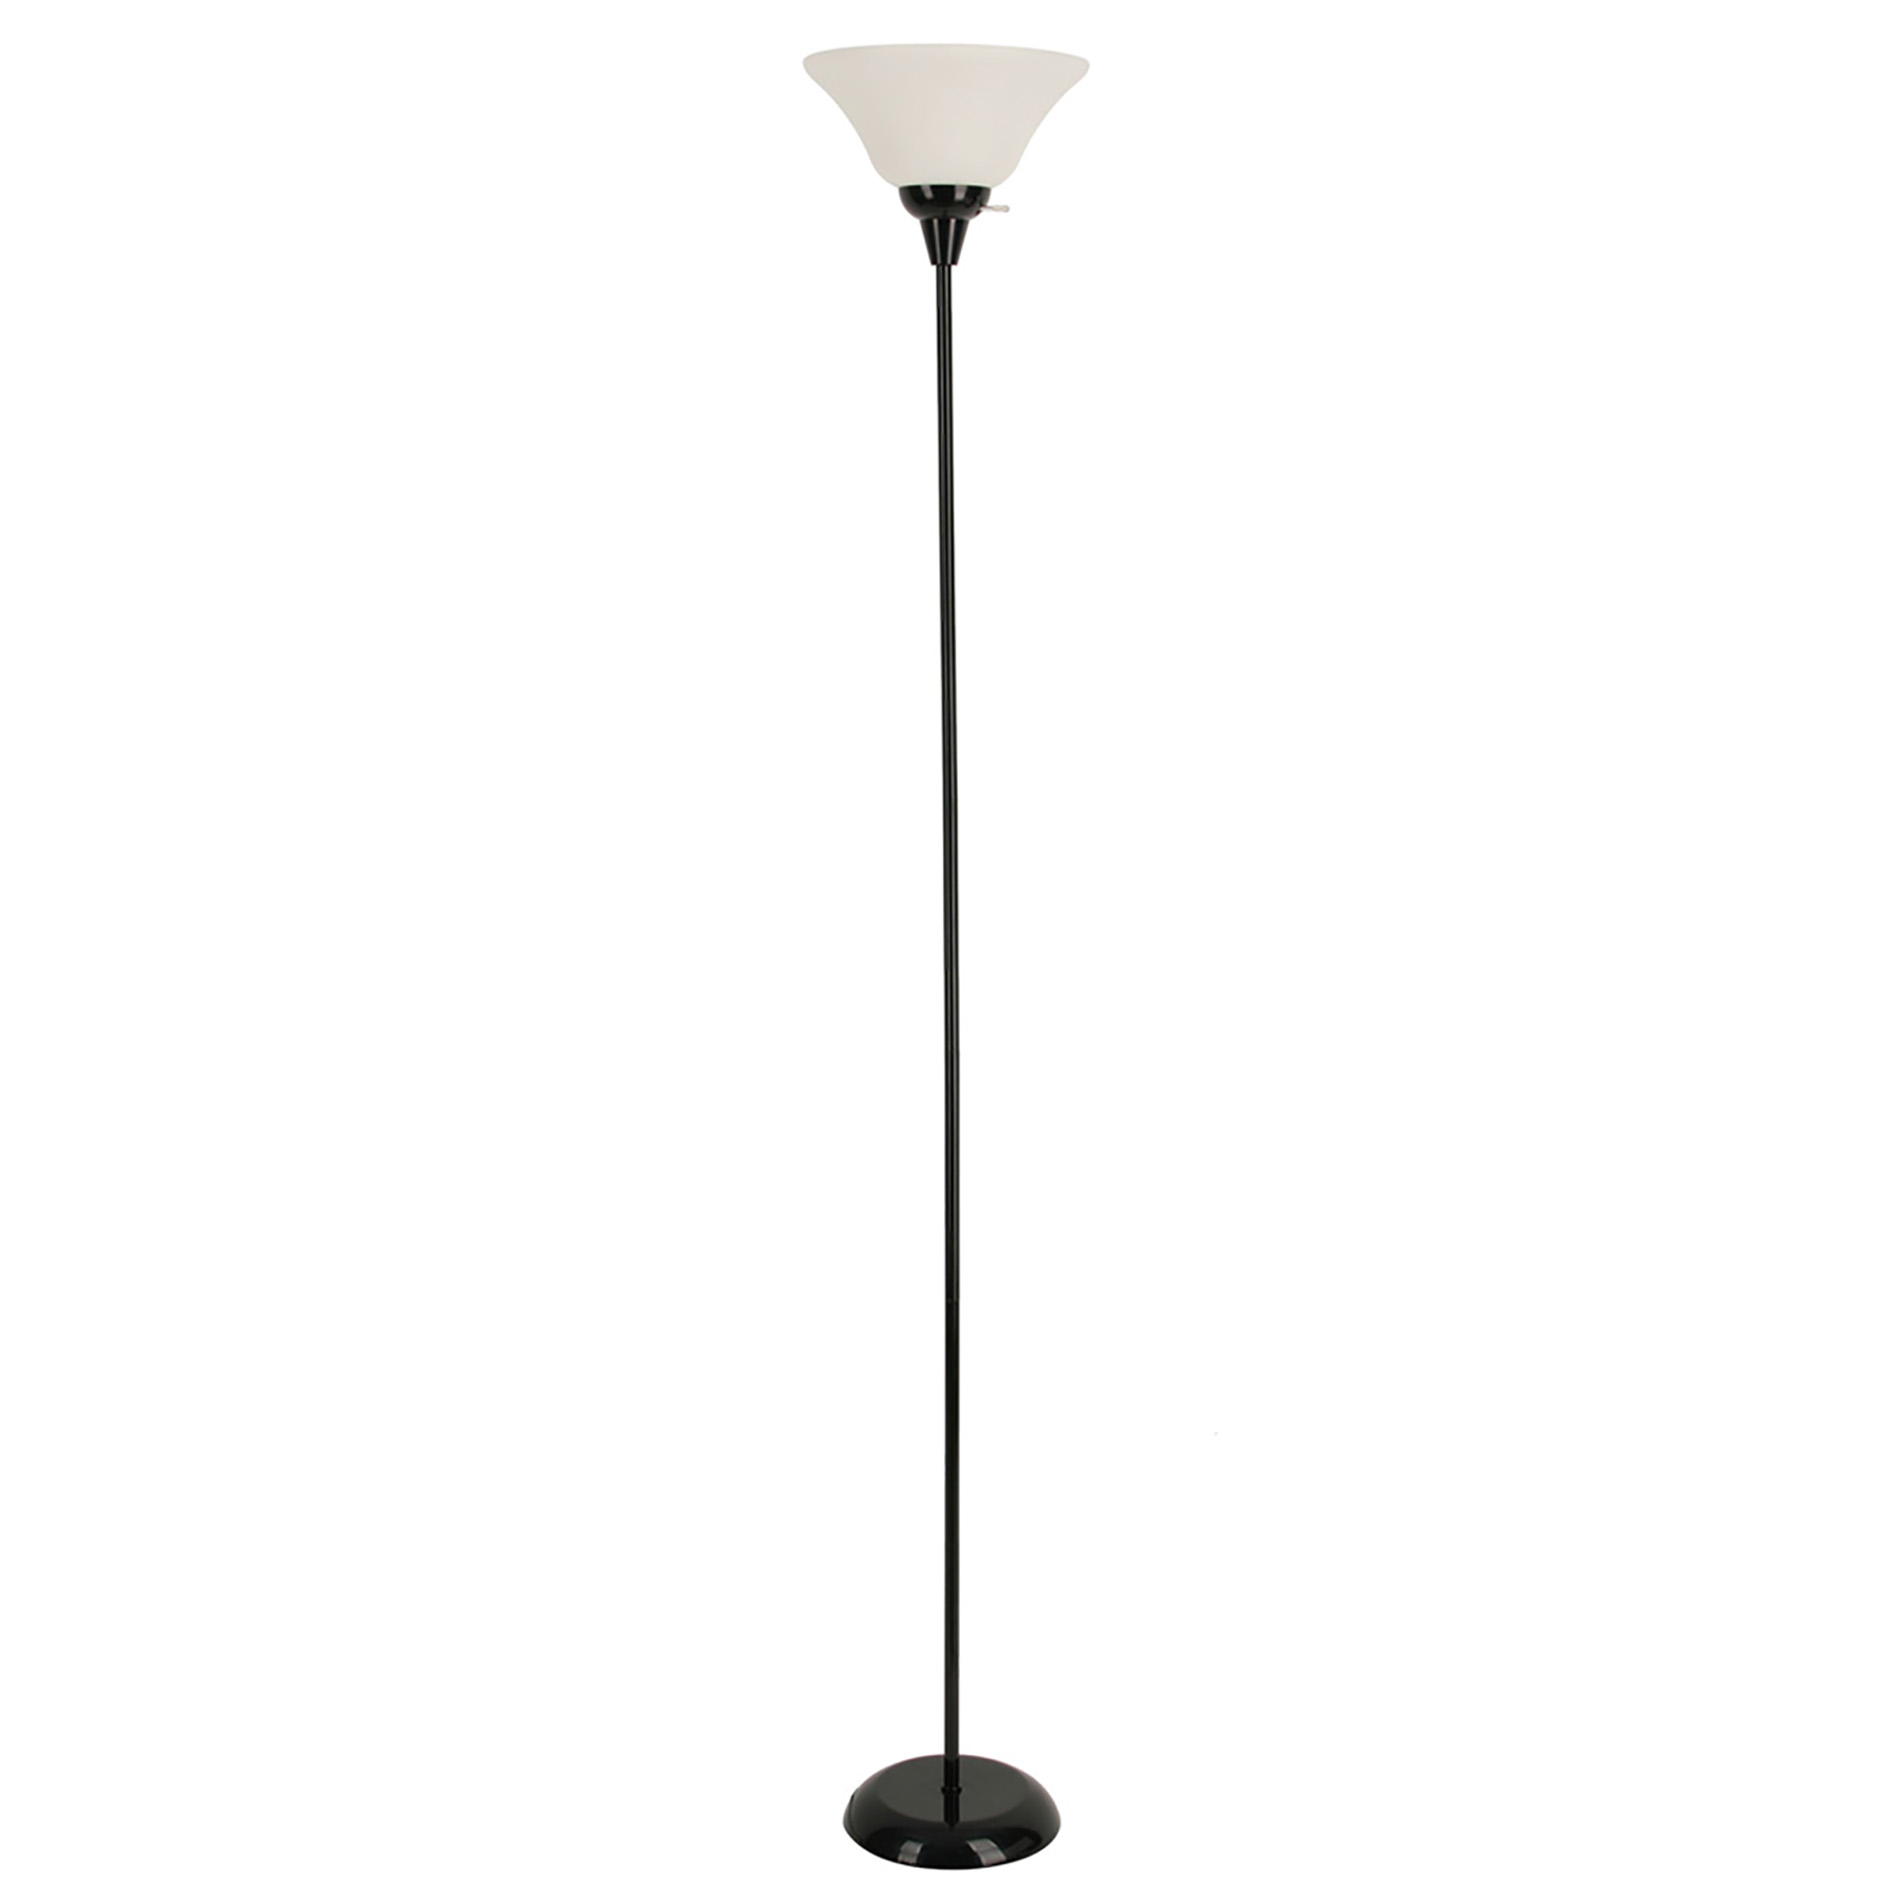 Essential Home CFL Black Painted Torchiere Floor Lamp